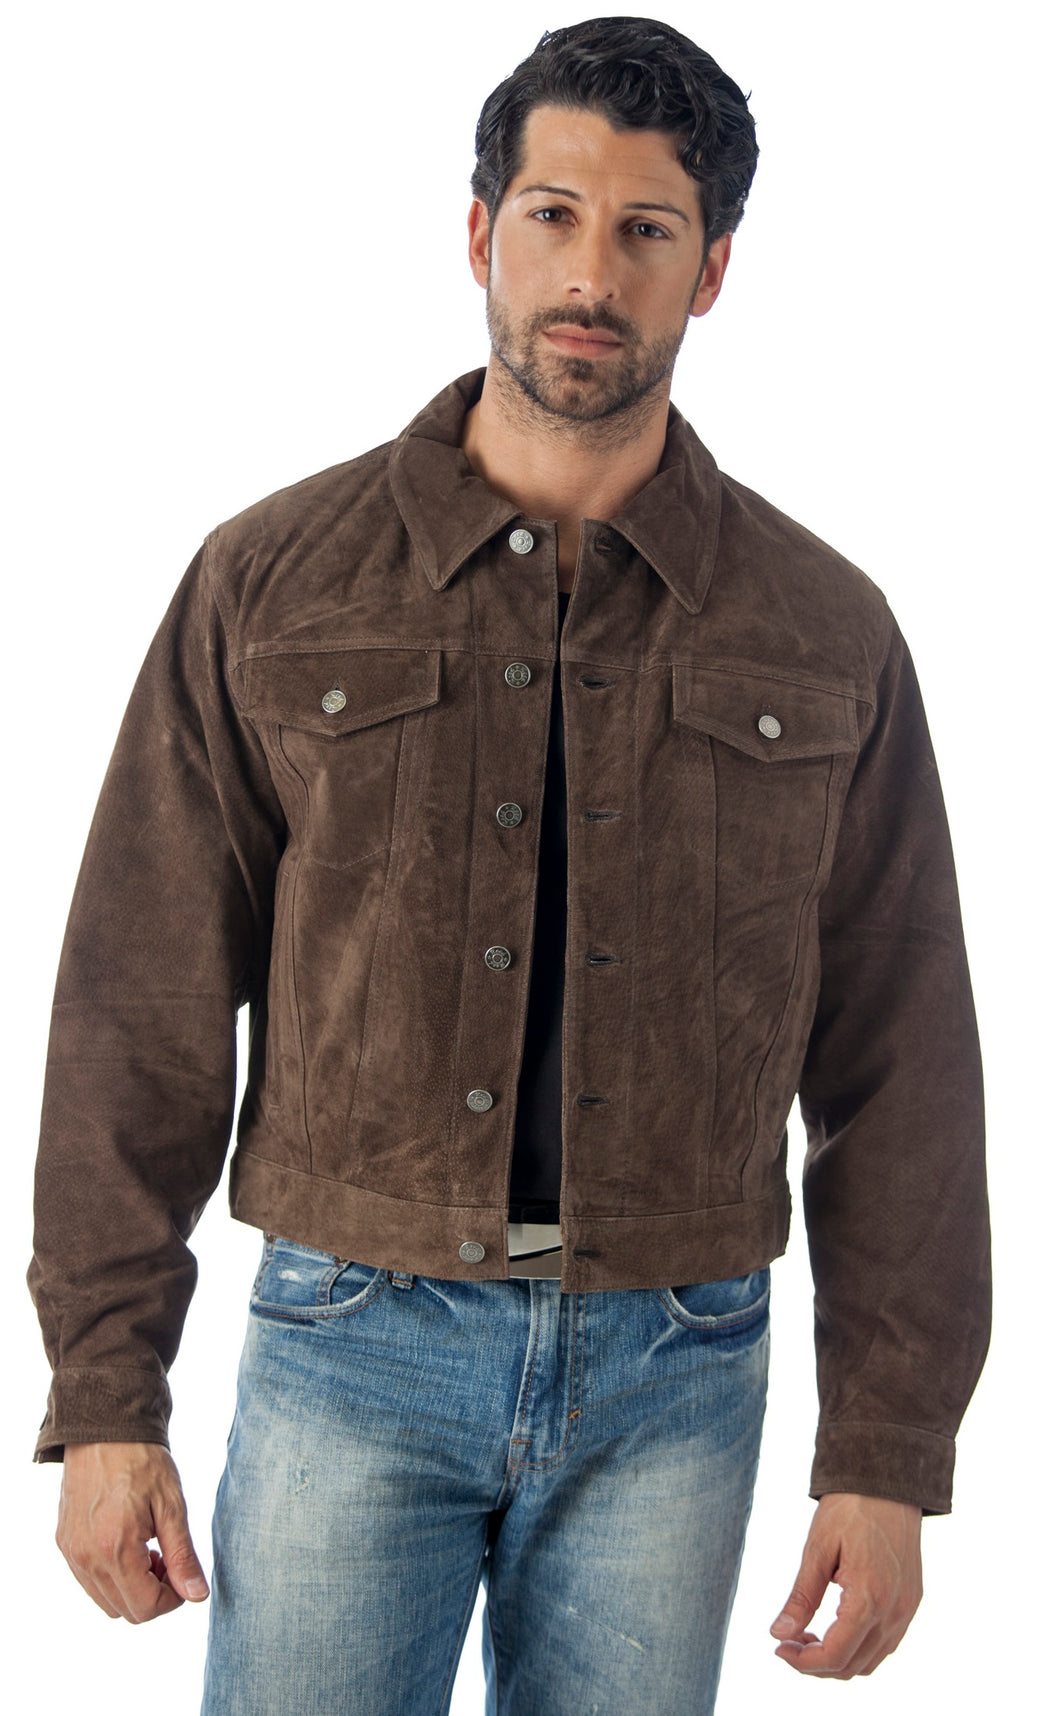 REED Men's Western Jean Style Suede Leather Shirt Jacket - Imported